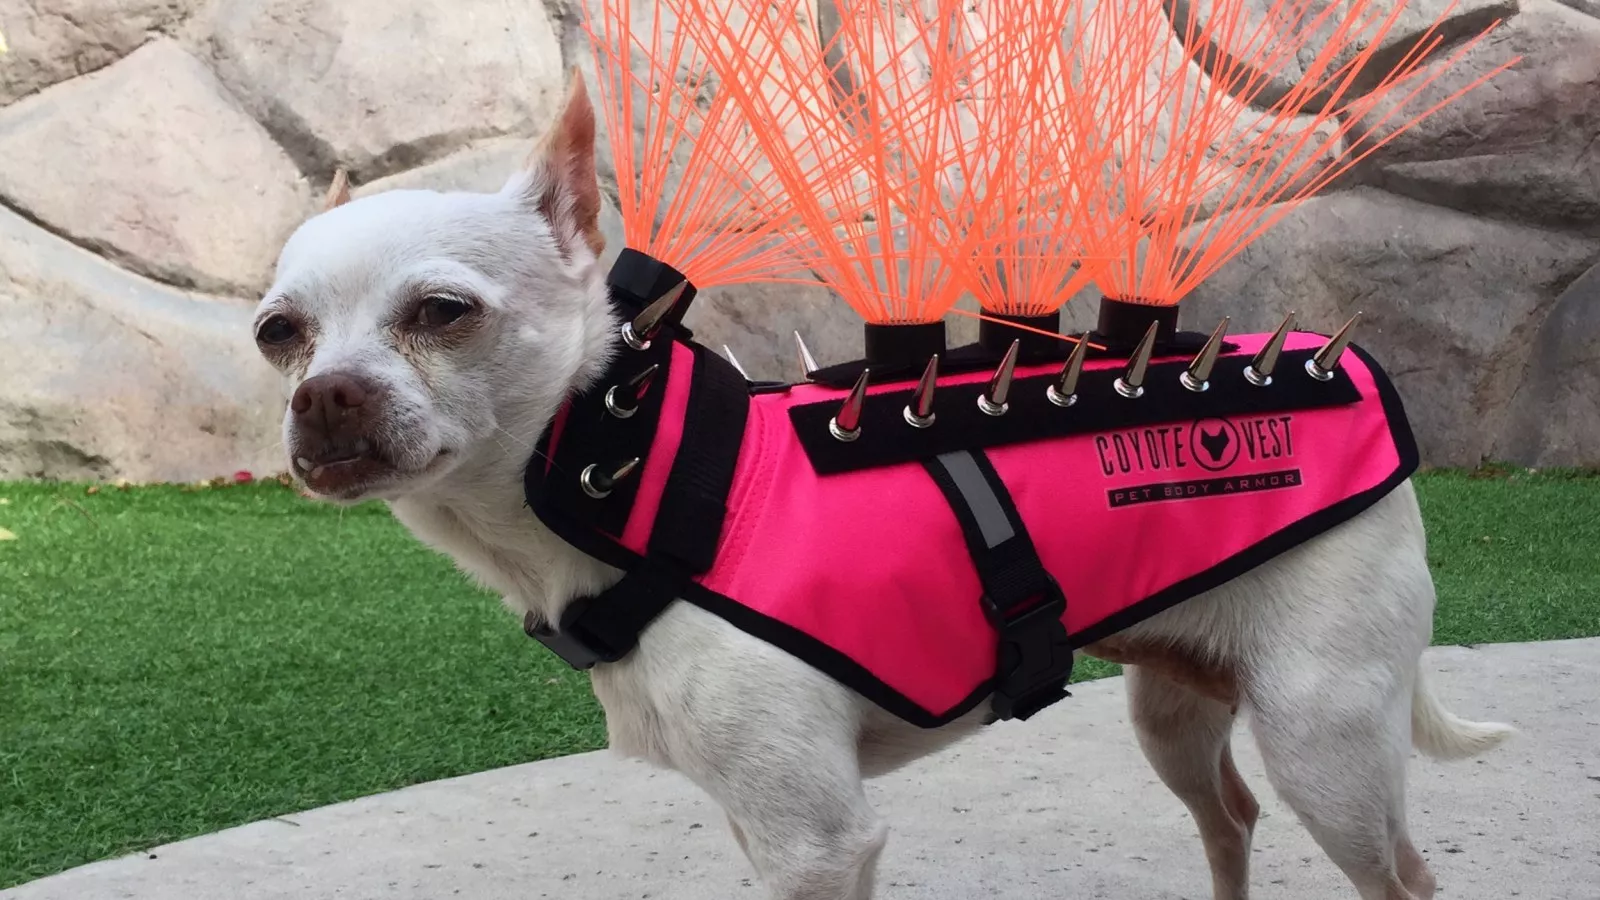 The internet is living for this dog's spiky, neon-pink outfit to